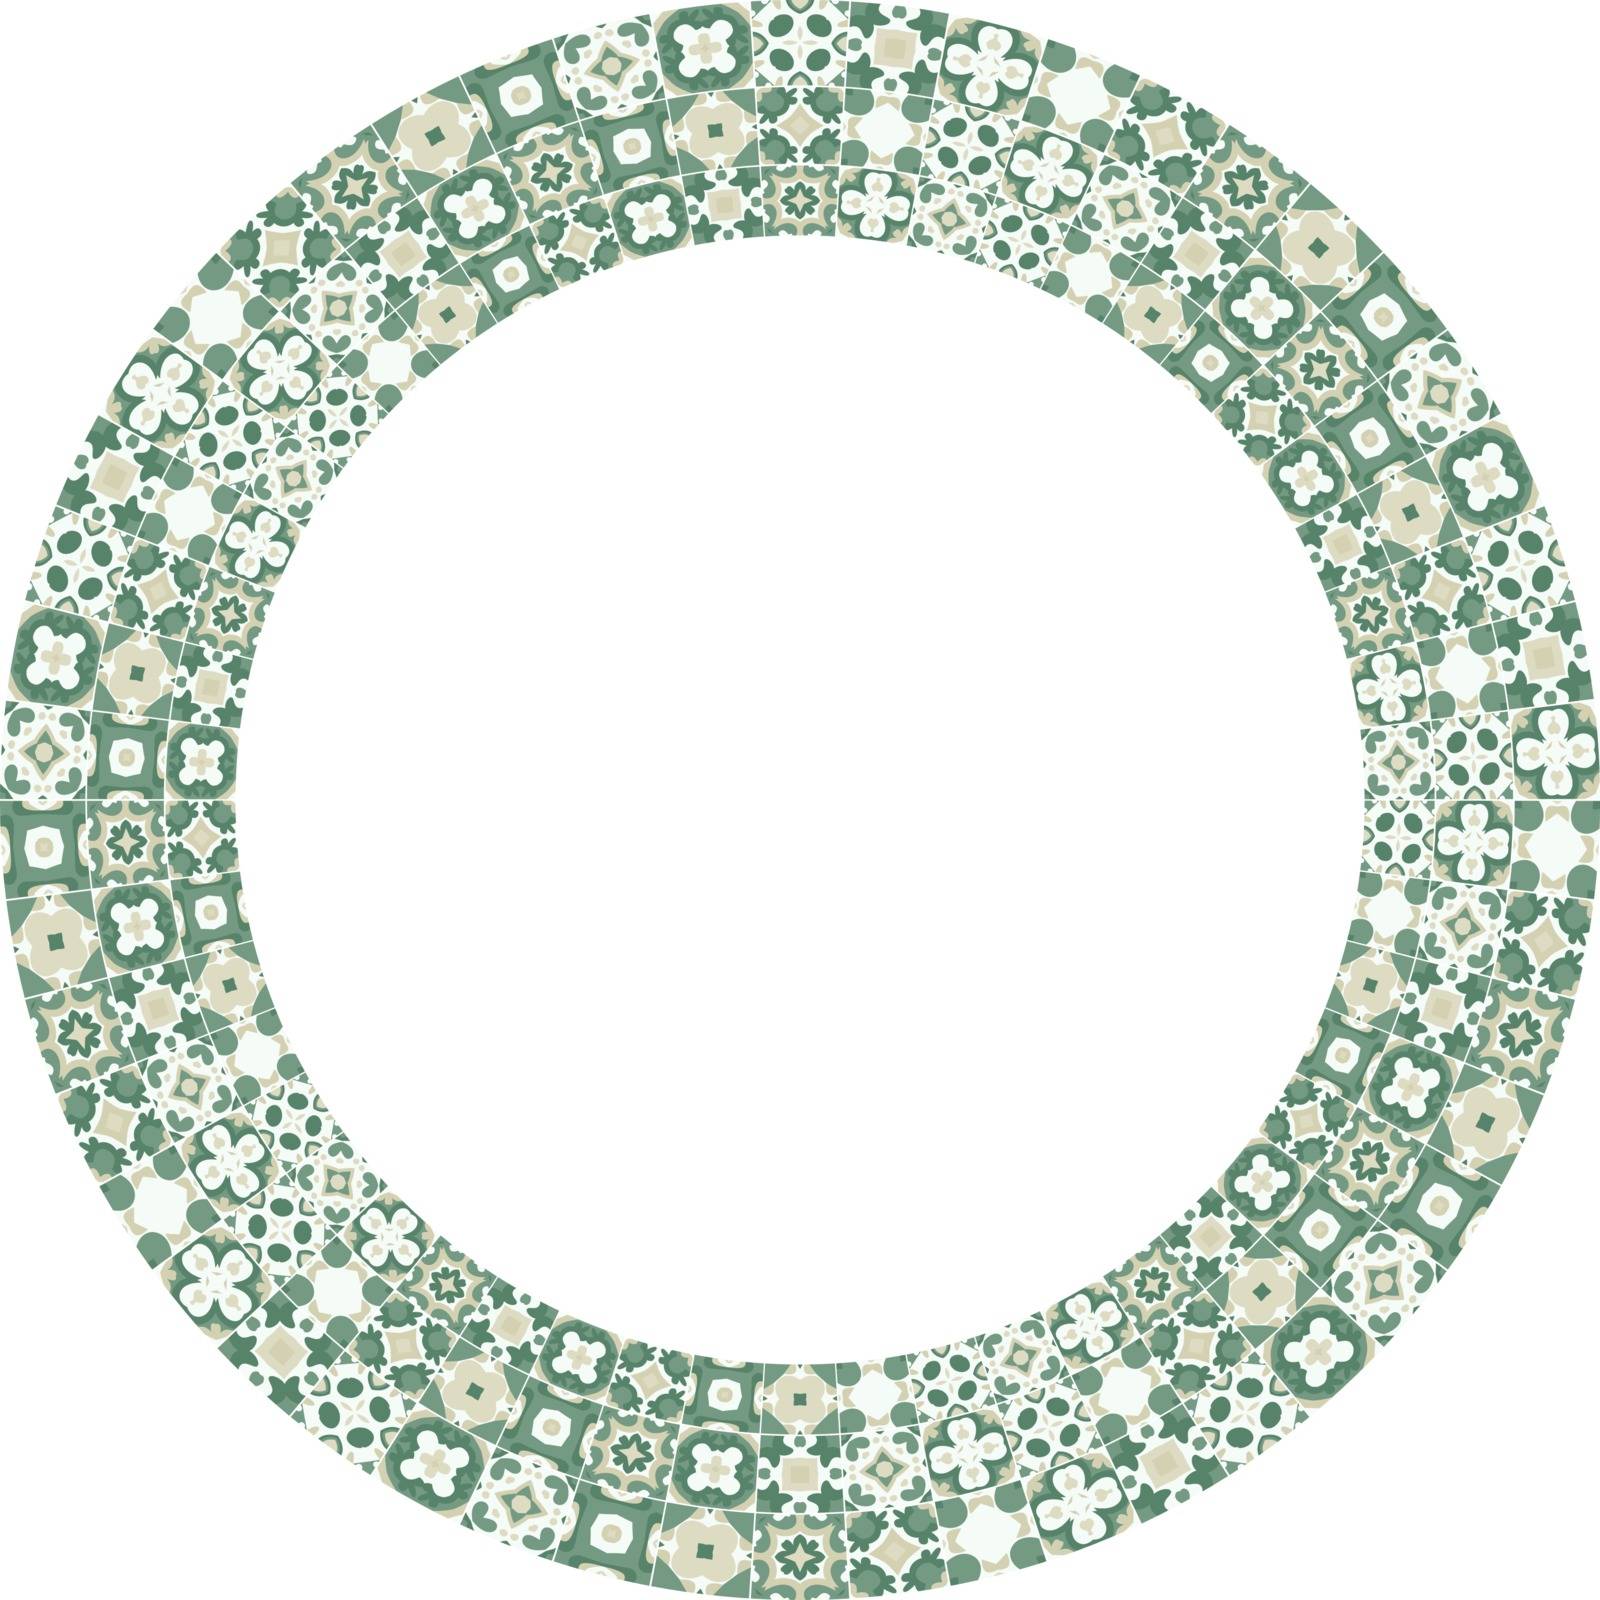 Decorative illustrated circle frame made of portuguese tiles